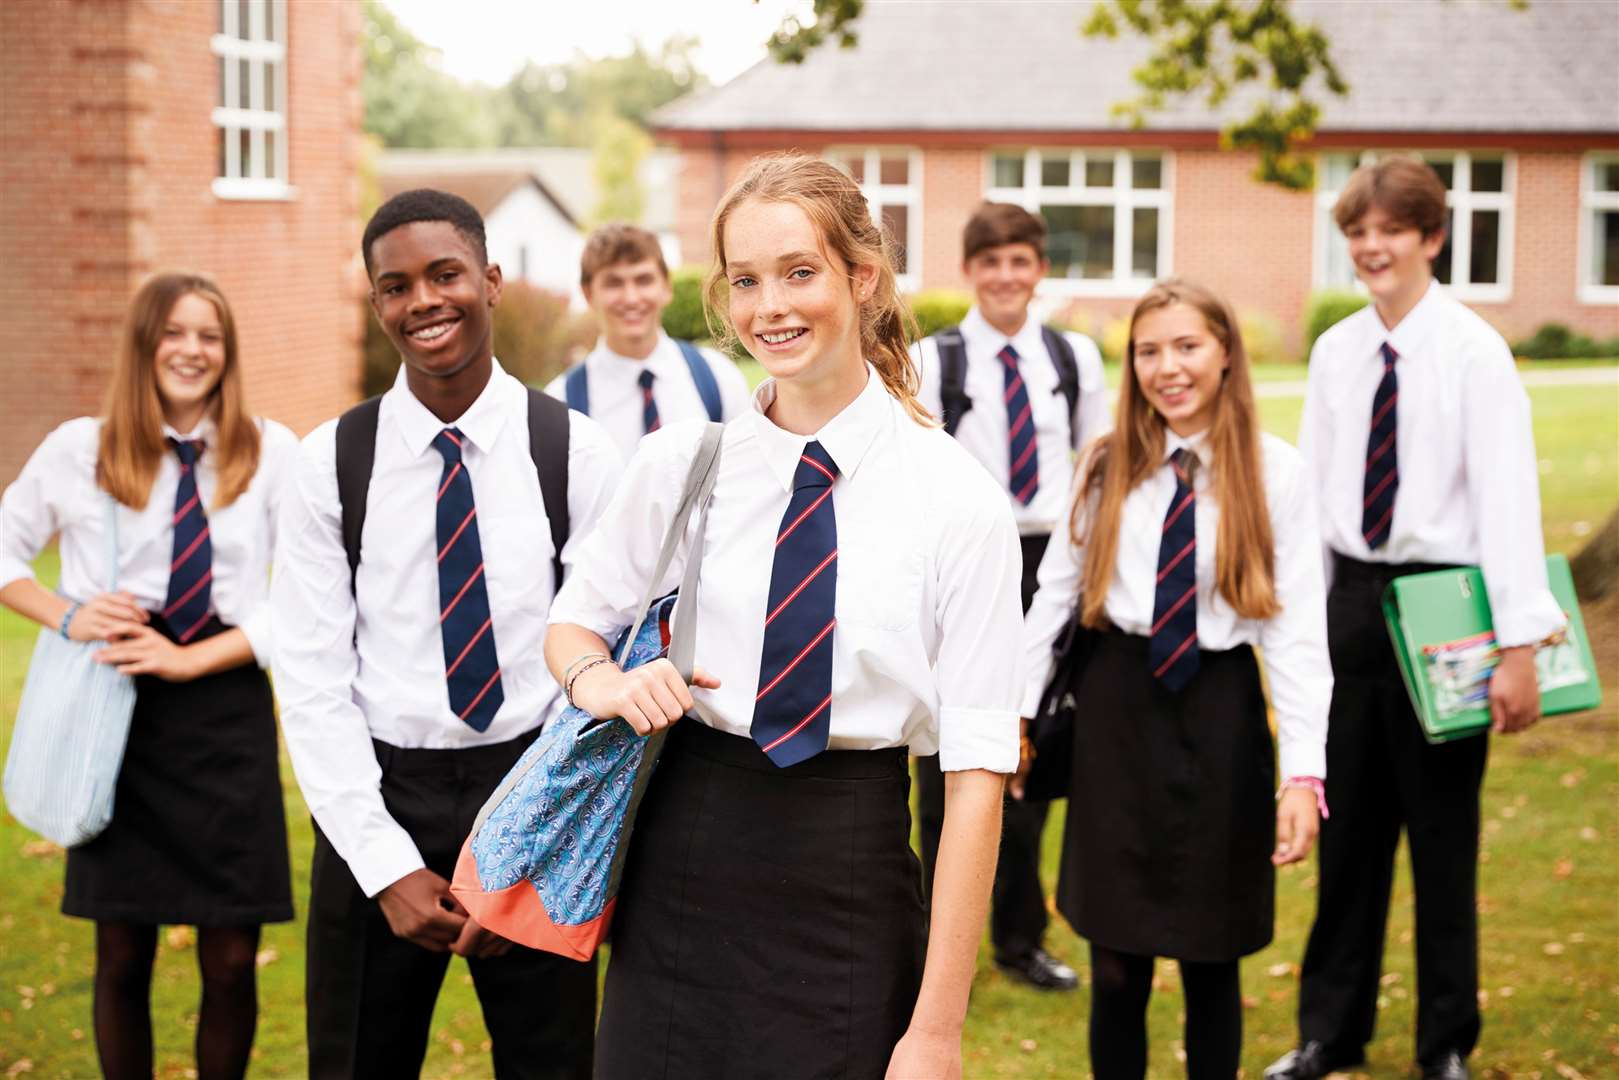 In 2019 KCC said more families than ever applied for a place at a Kent secondary school